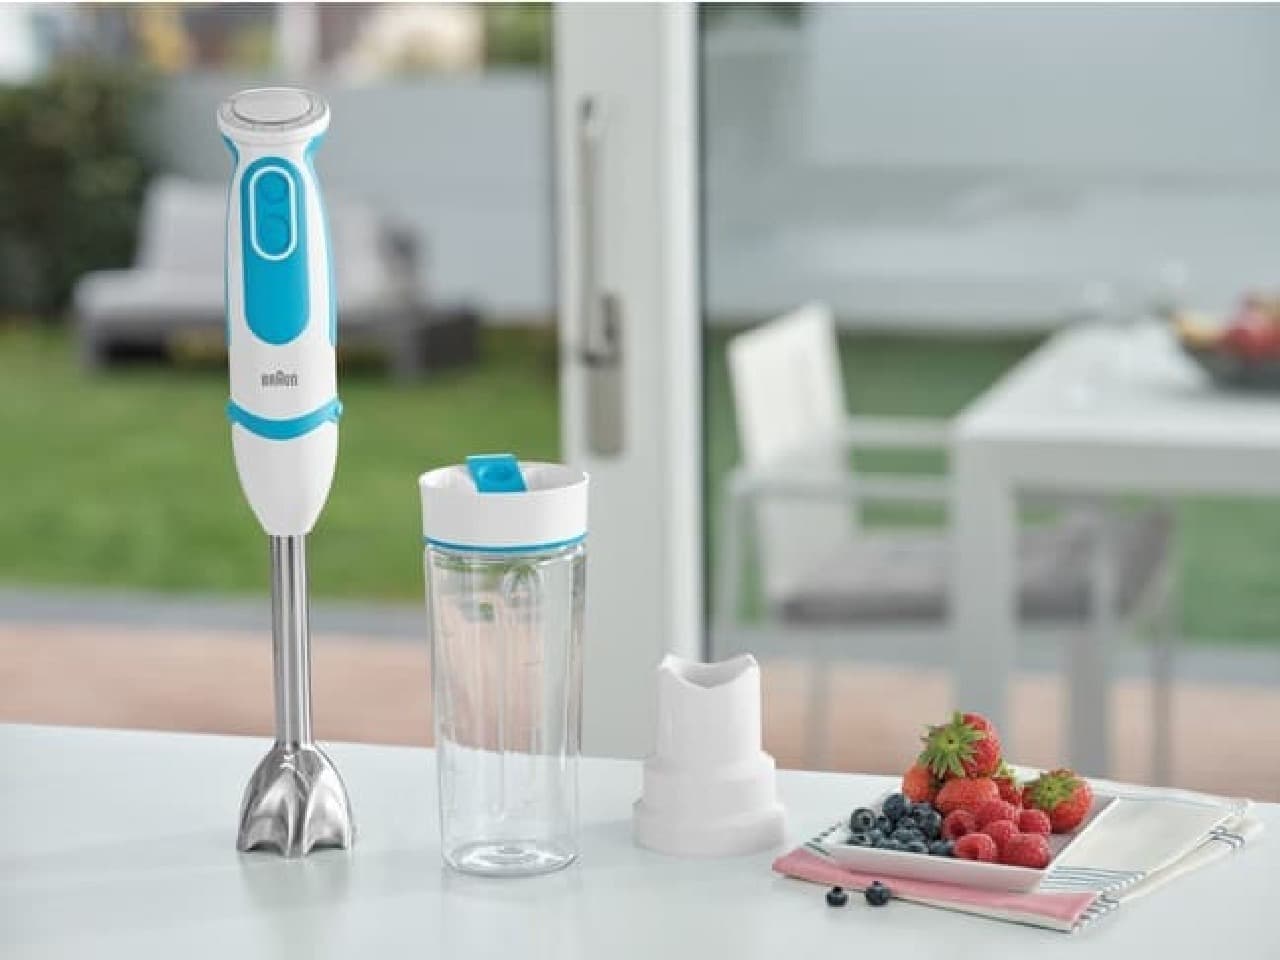 Braun Multiquick 5 Vario Fit Hand Blender MQ5051" released -- smoothies in about 1 minute & easy to carry